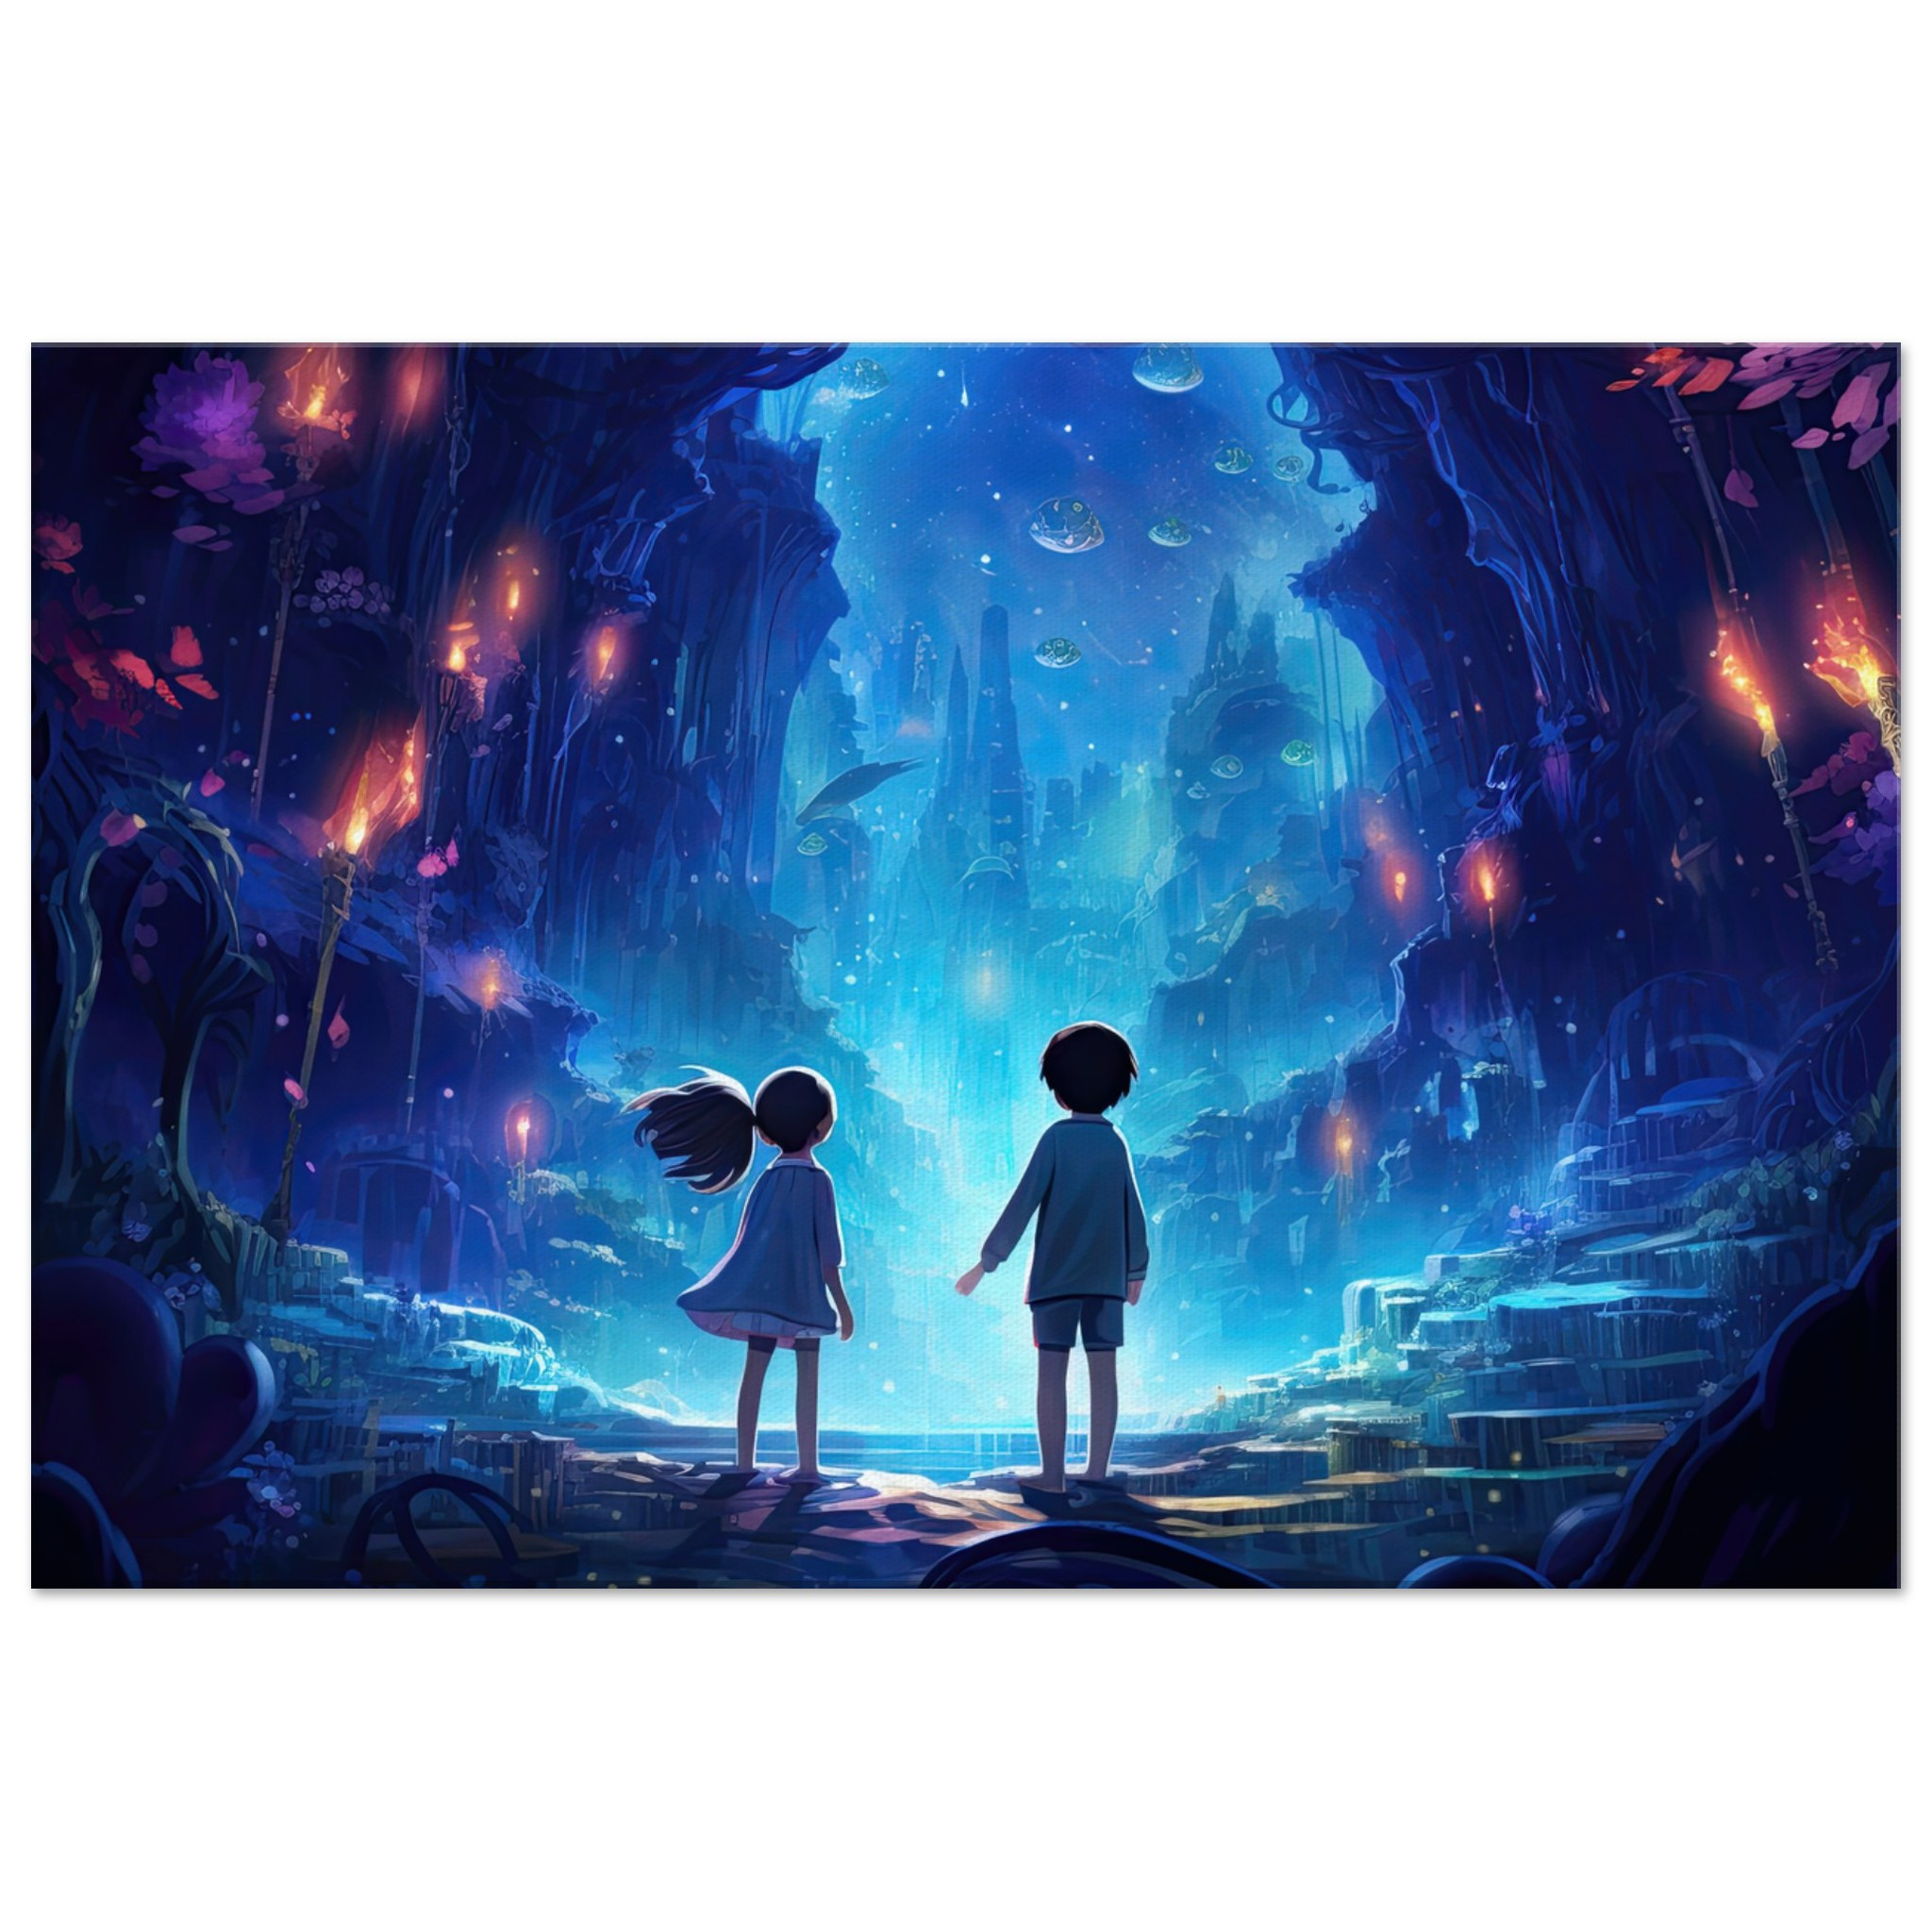 A World of Wonder – Anime Style Canvas Print – 60×90 cm / 24×36″, Thick